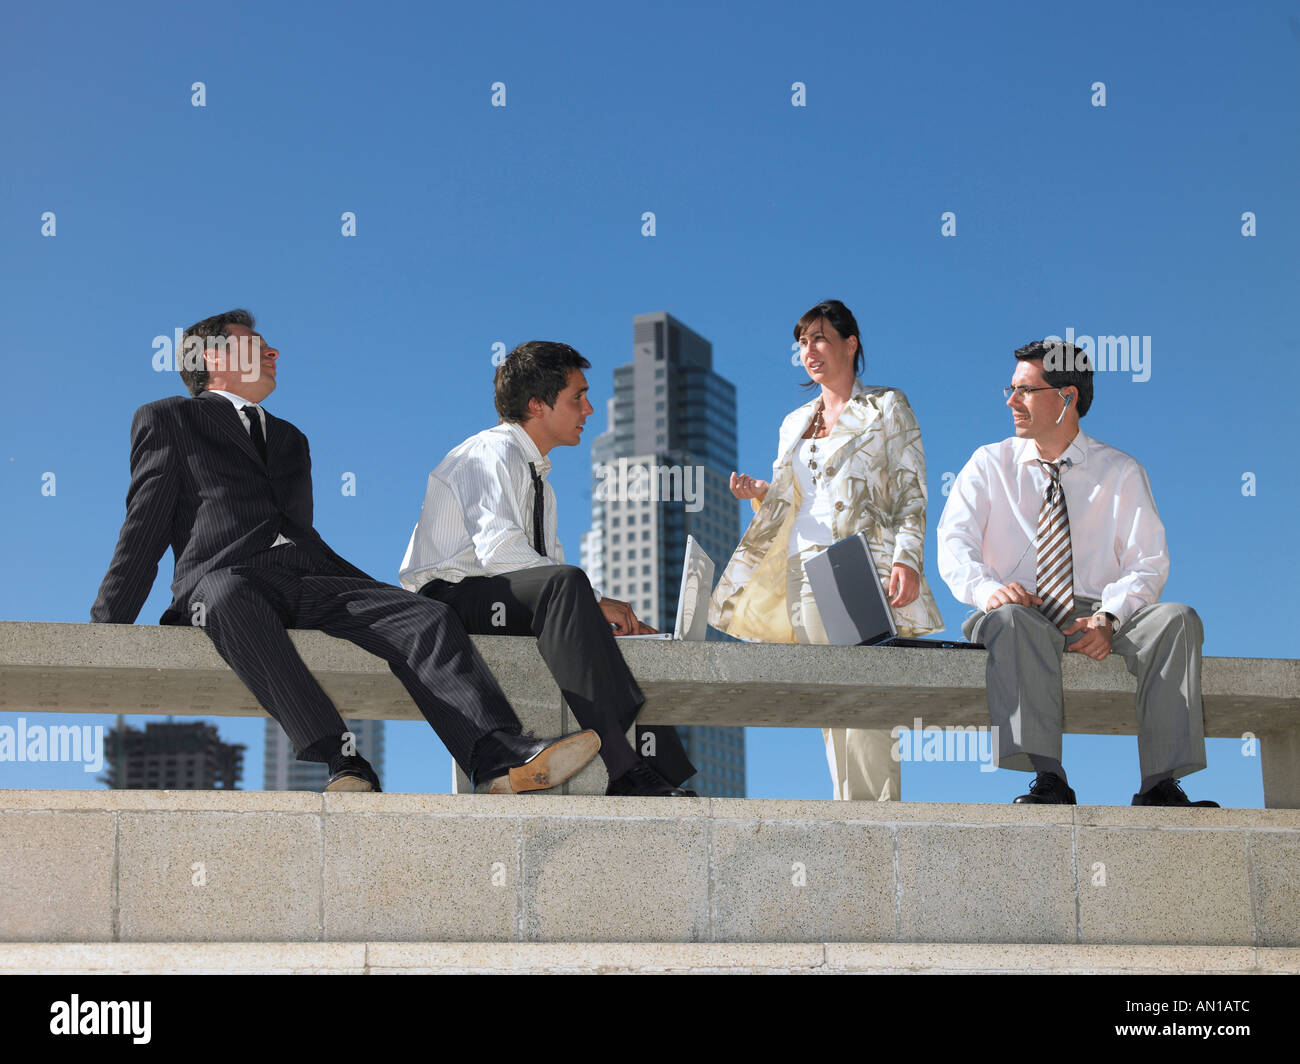 Four people chatting on a sunny day Stock Photo